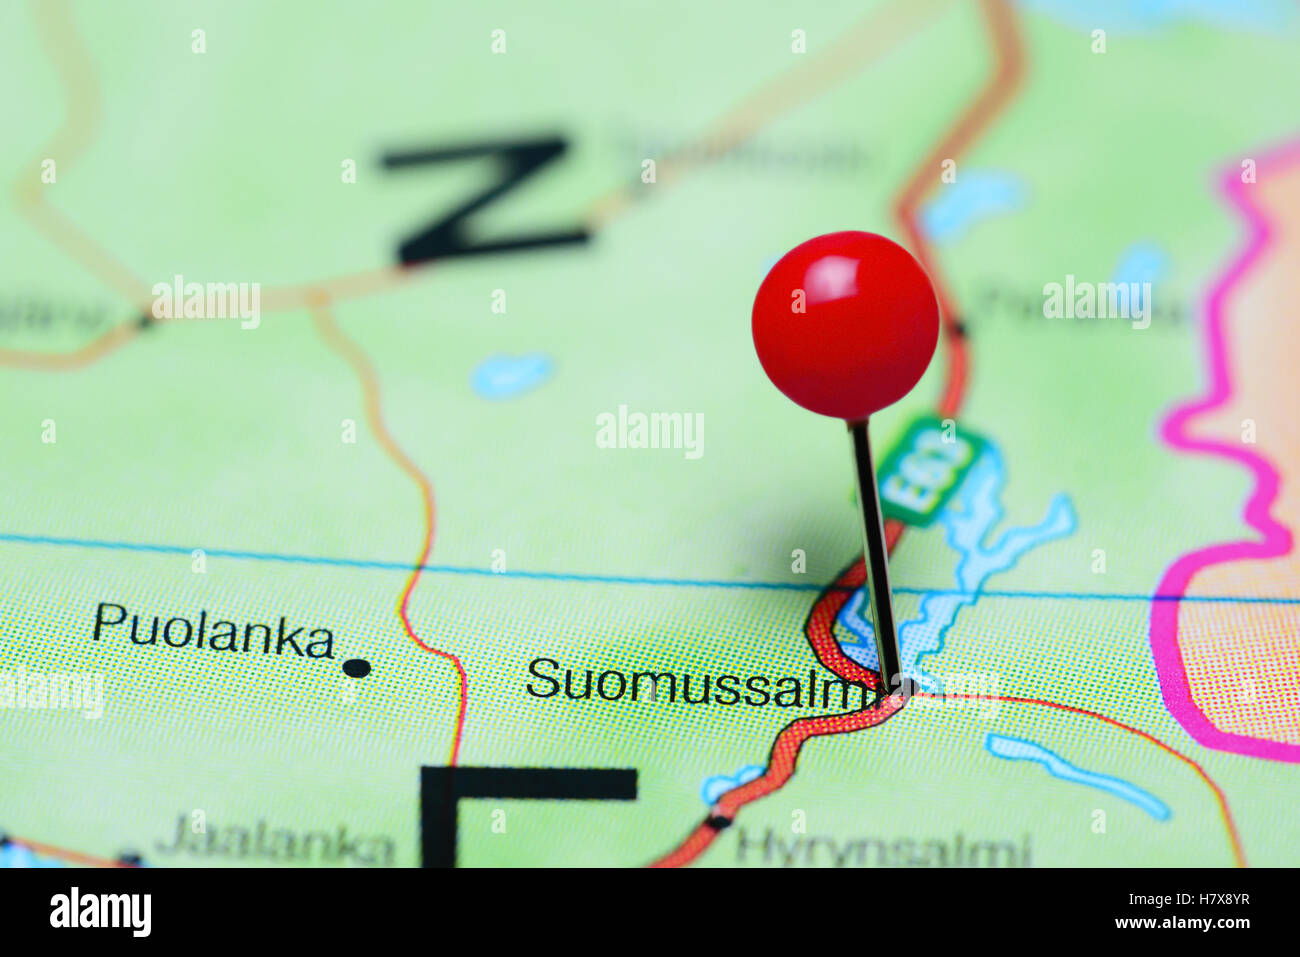 Suomussalmi pinned on a map of Finland Stock Photo